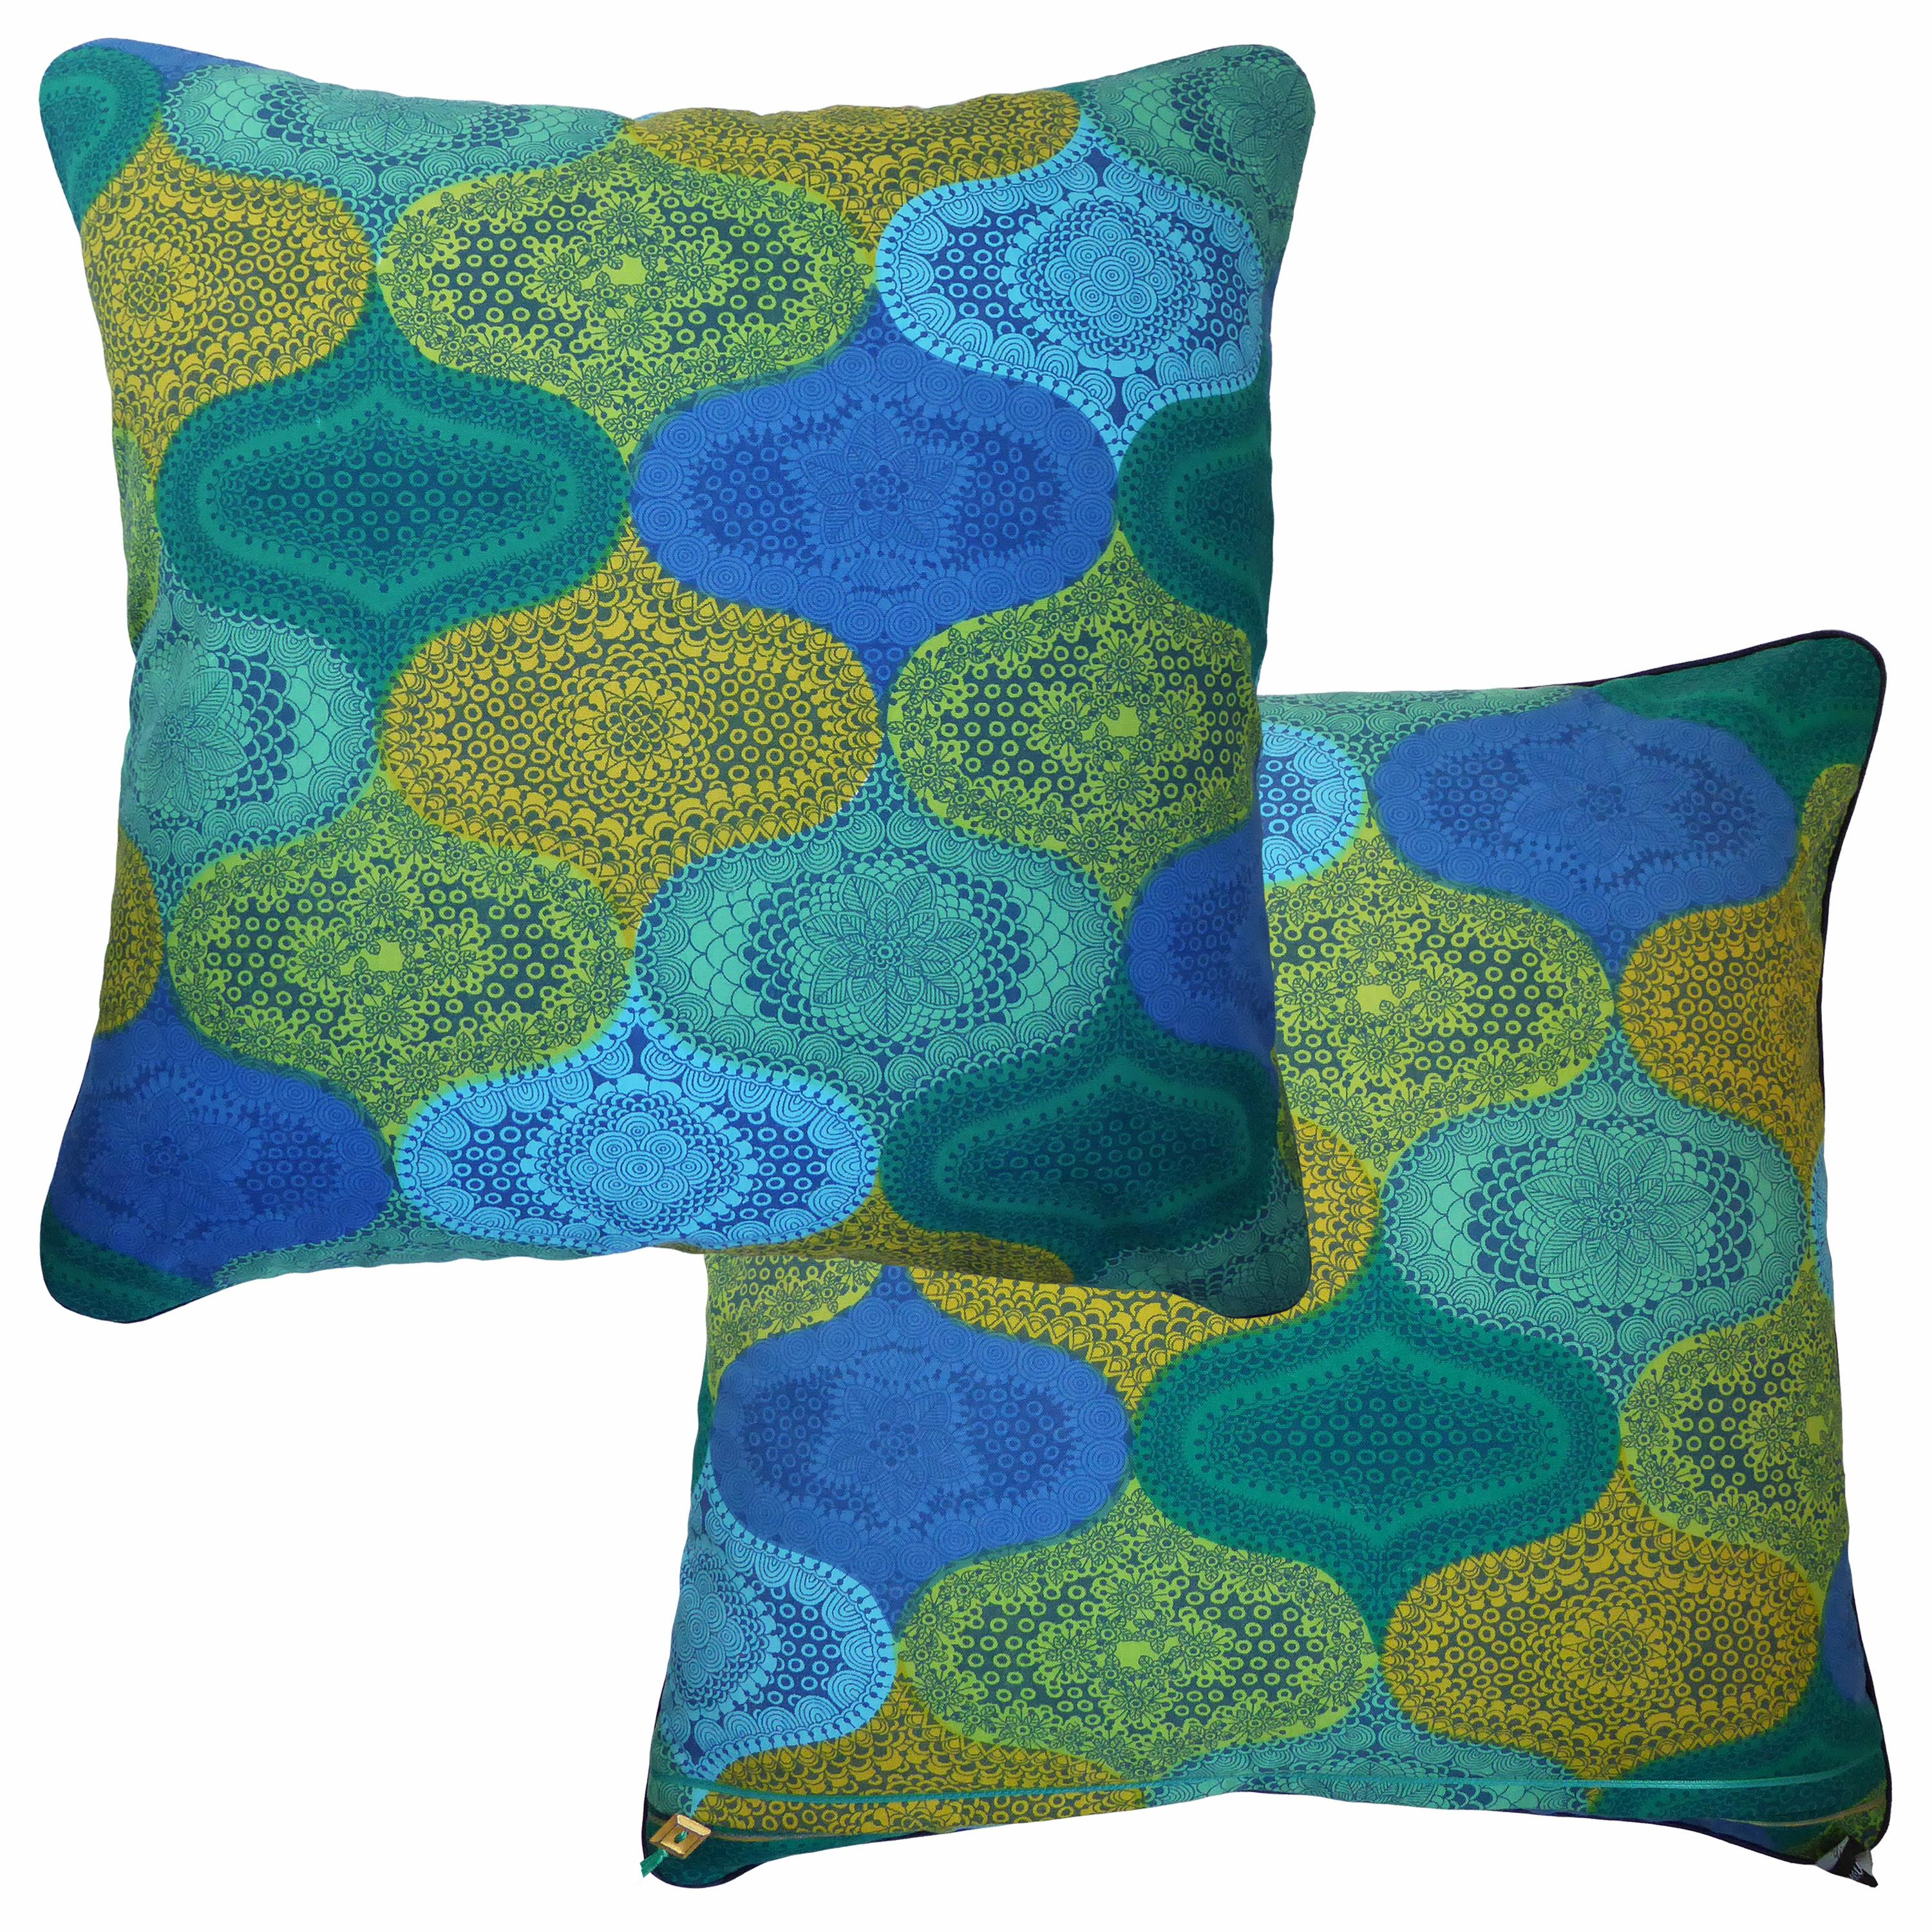 Mid-Century Modern ‘Vintage Cushions’ Luxury Bespoke-Made Pillow ‘Alhambra', Made in London